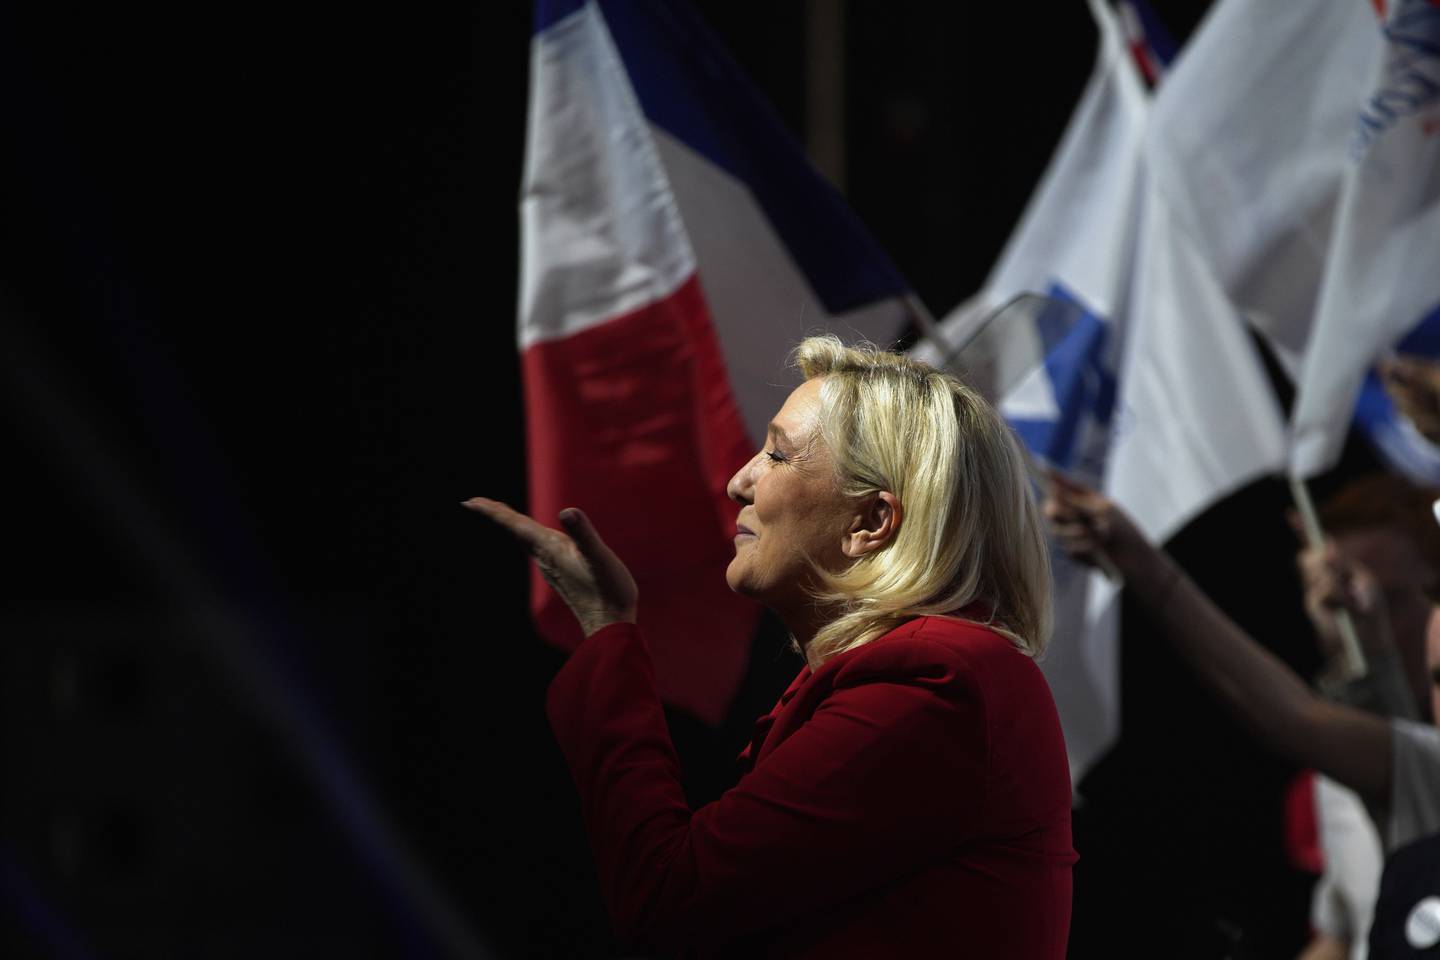 Far-right candidate Marine Le Pen has toned down her nativist platform and focused instead on the economy. AP